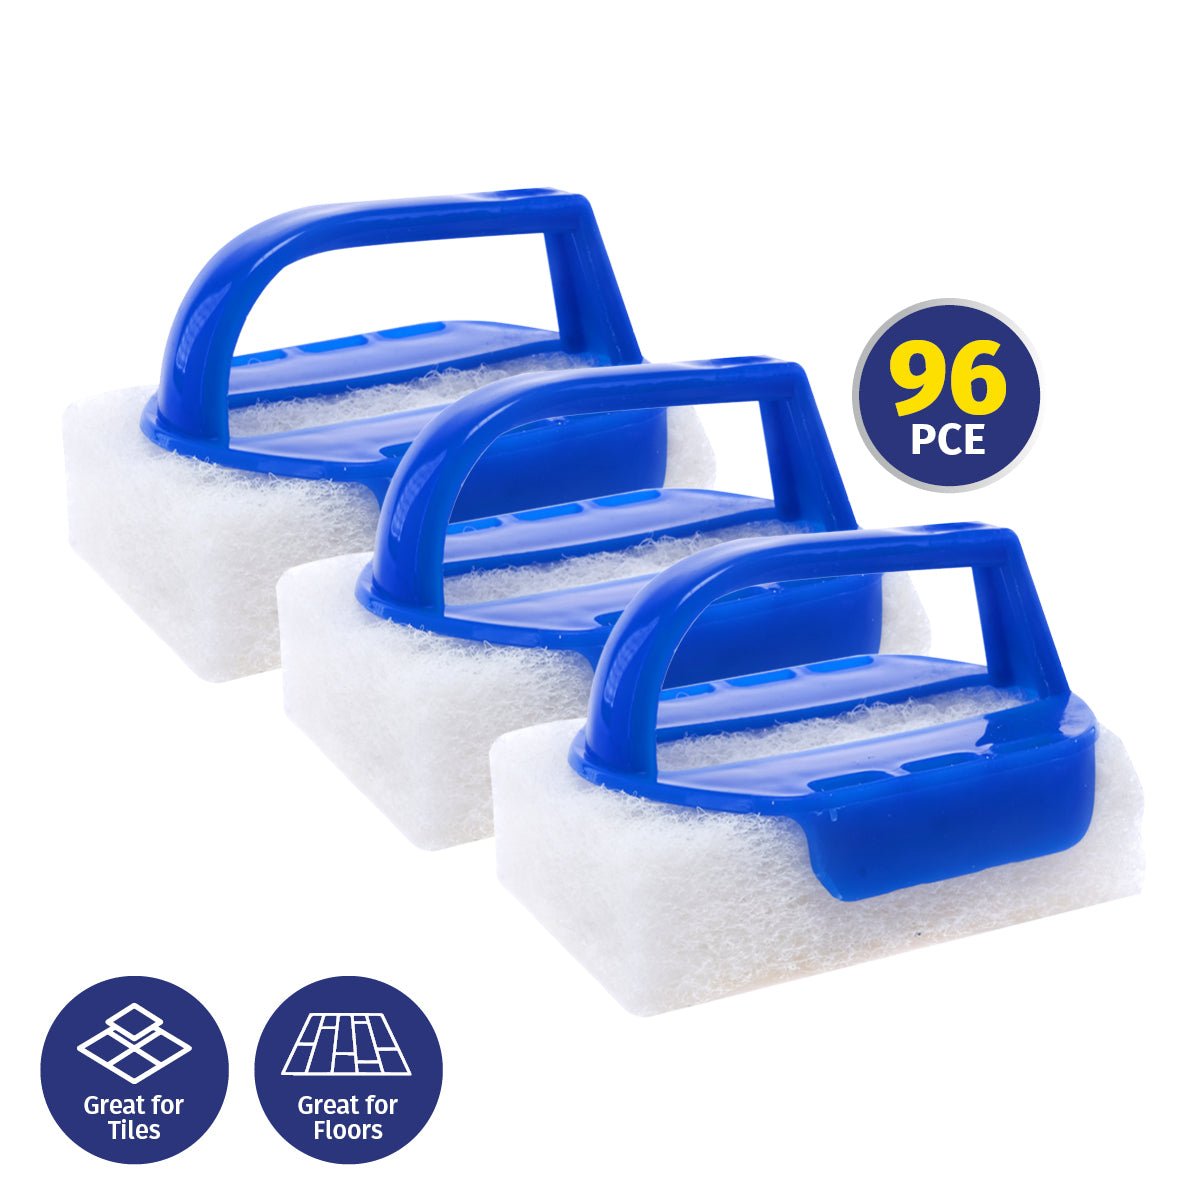 Xtra Kleen 96PCE Scourer Pads Easy Grip Handle Tool Refills Included 7 x 10cm